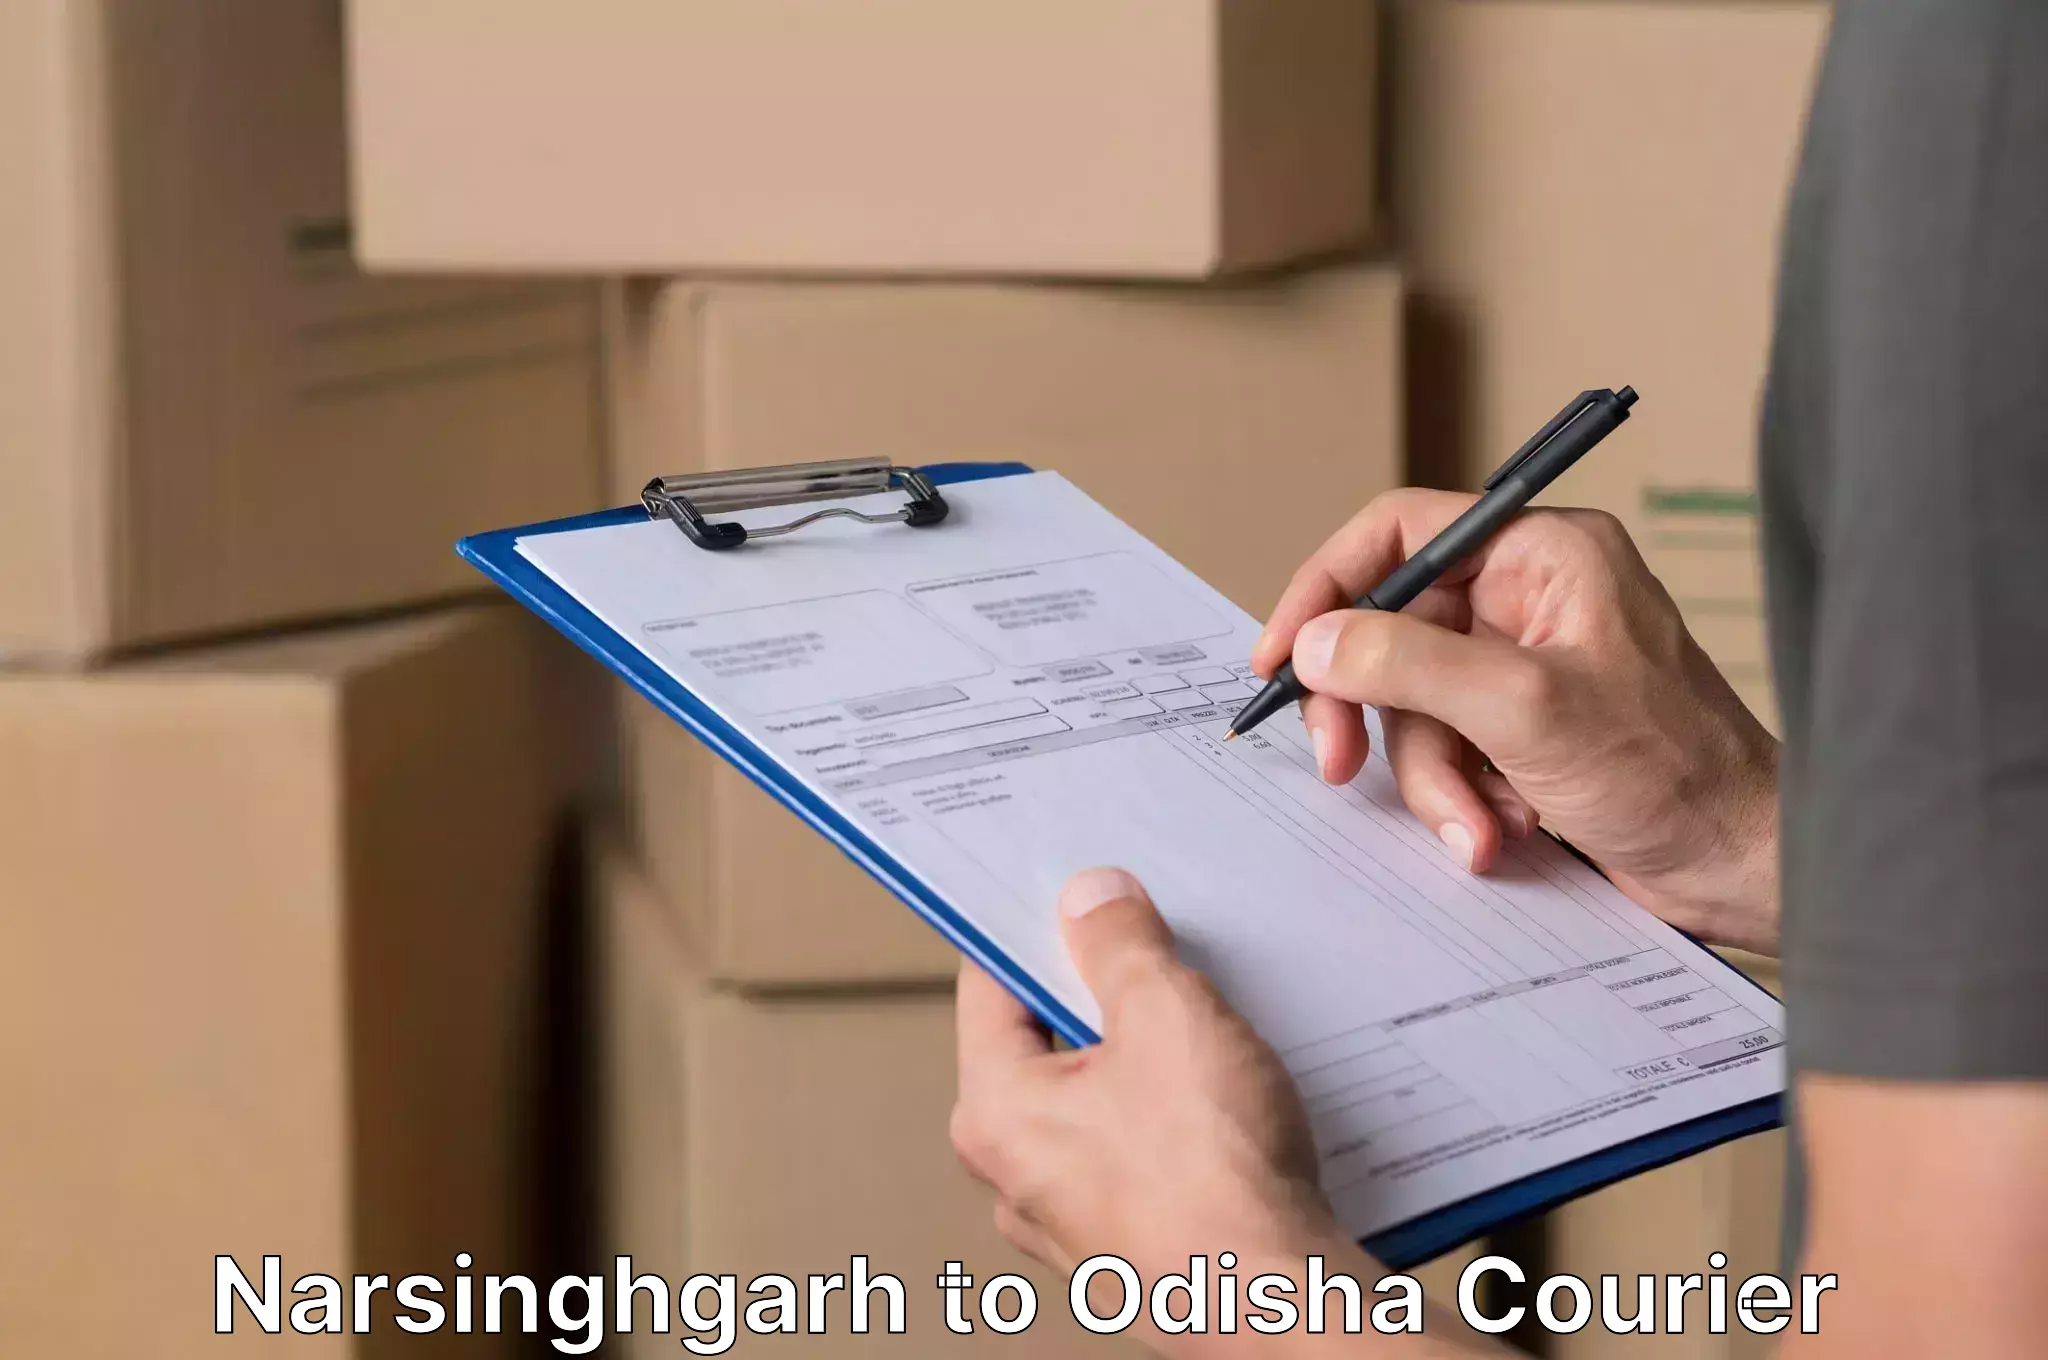 Hassle-free relocation in Narsinghgarh to Chandipur